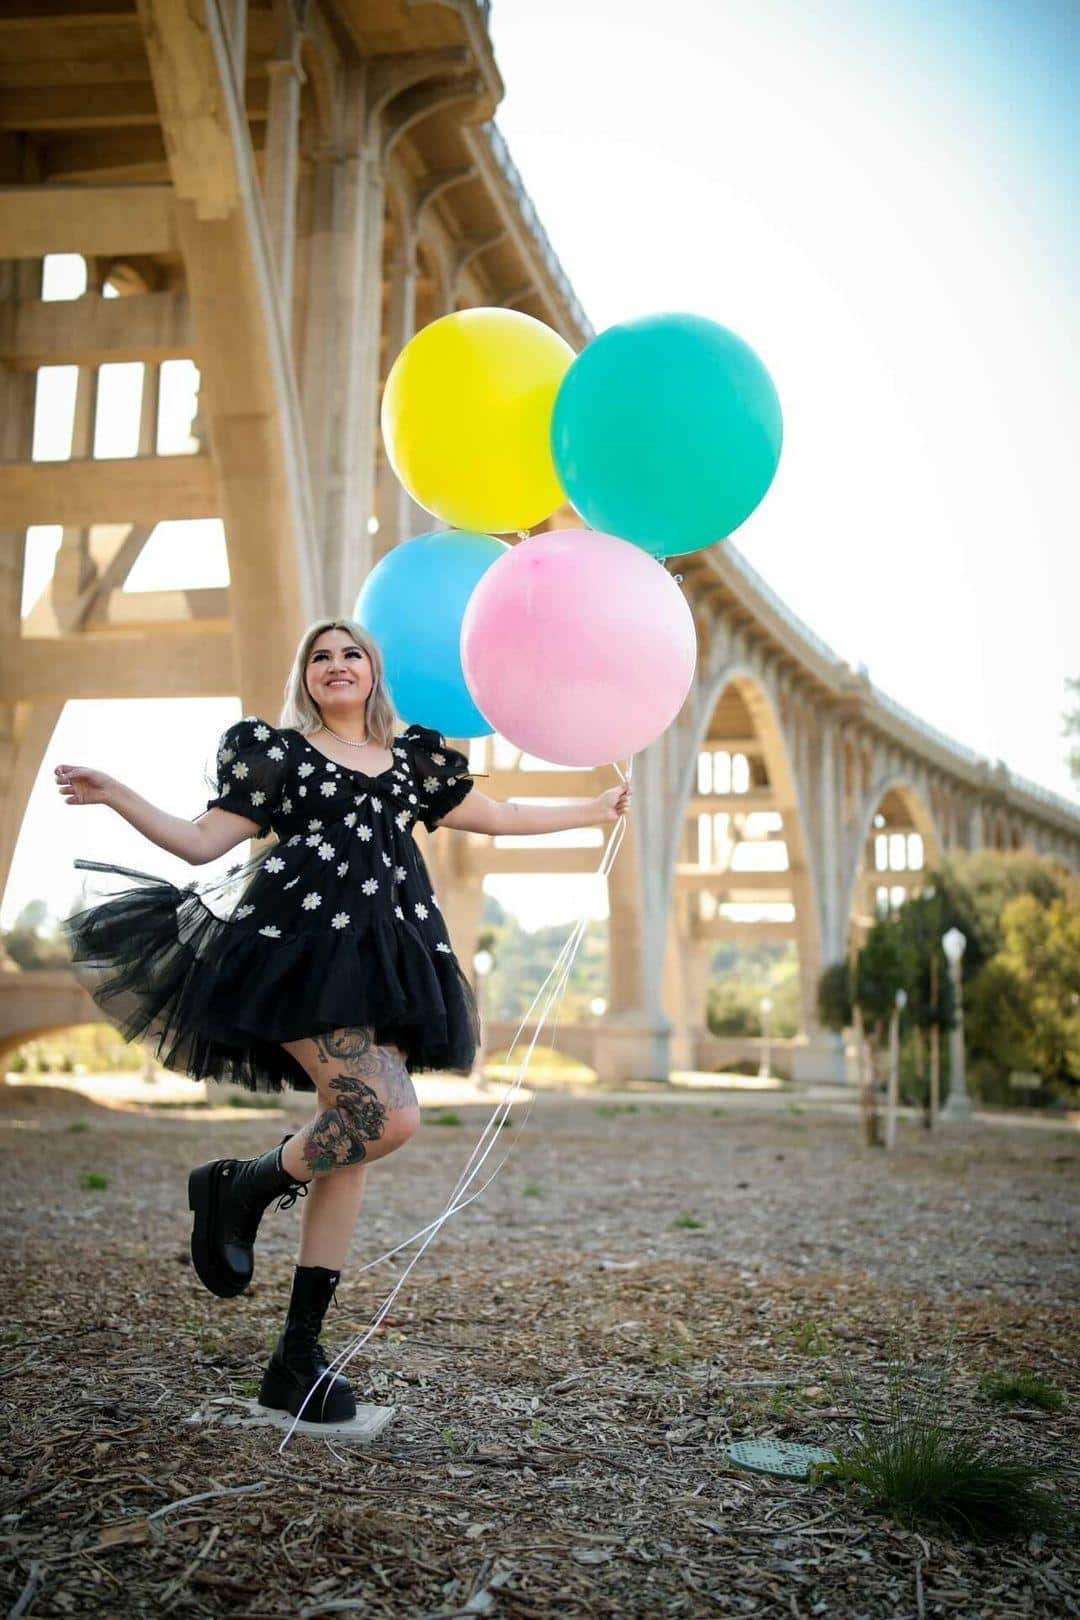 Thank you for the beautifil picture compostion including the colorful ballons.